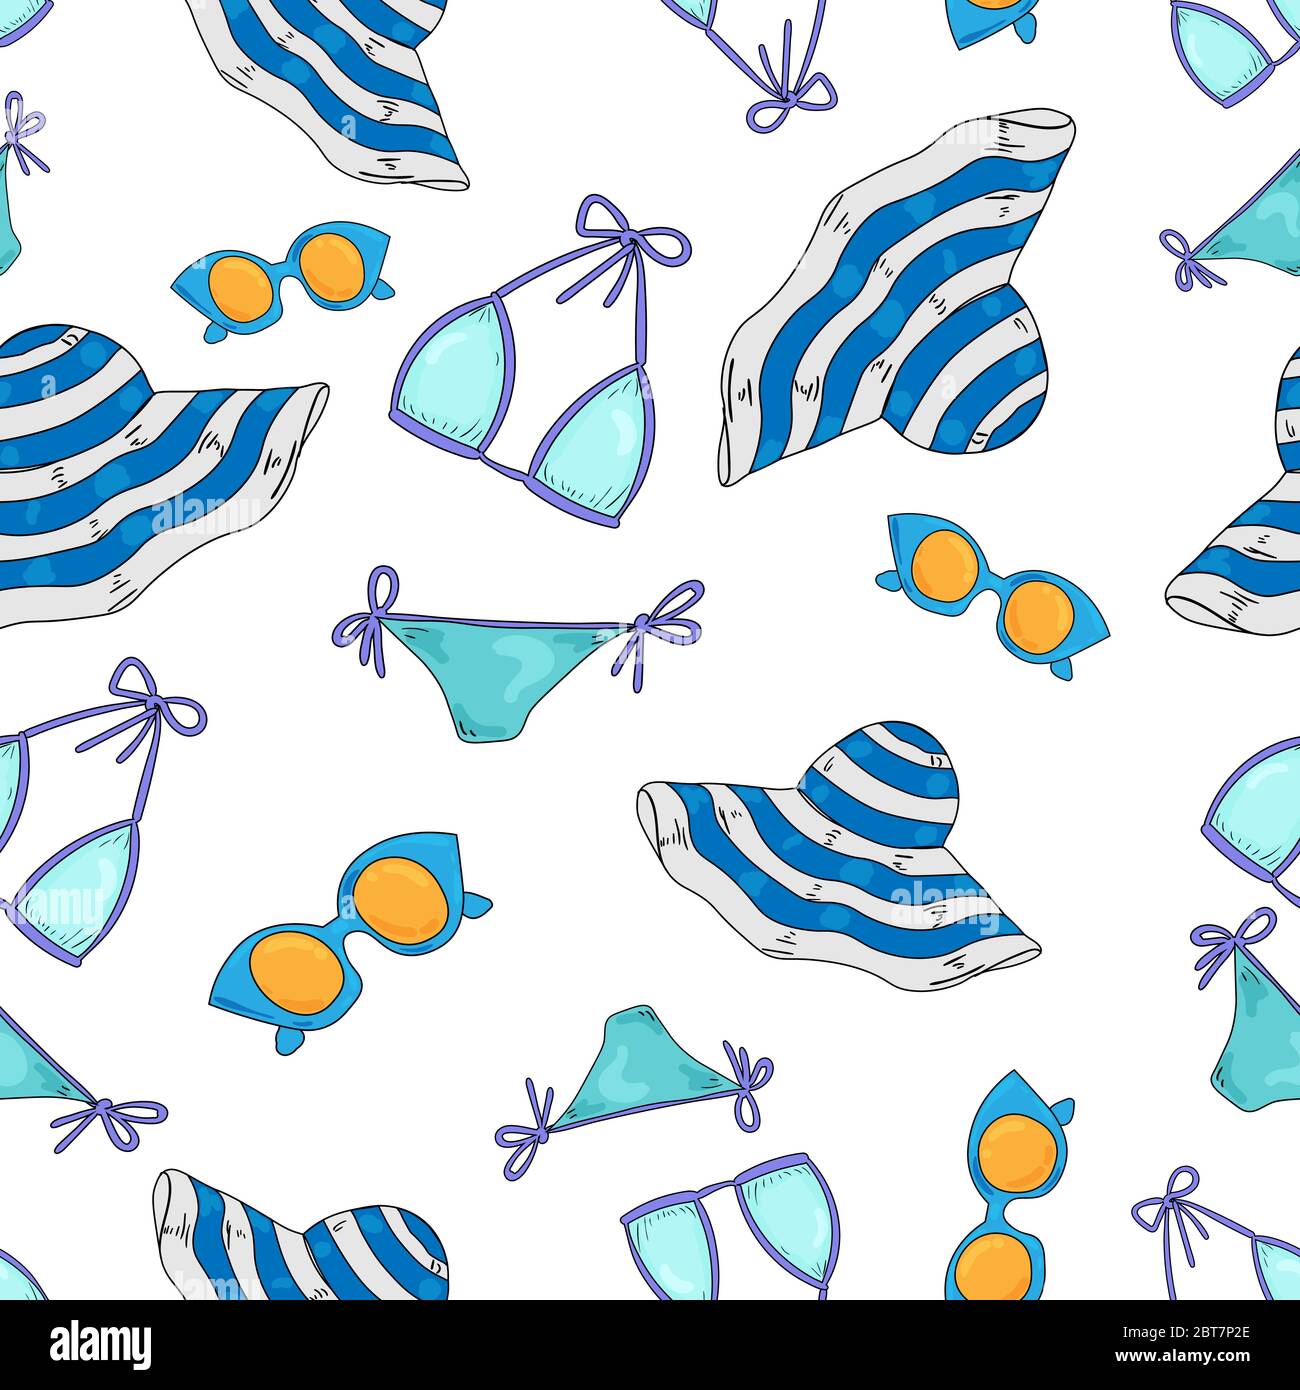 Sea vacation seamless pattern. Sunbathing activity beaches elements and accessories. Marine holidays and leisure symbols. Stock Vector